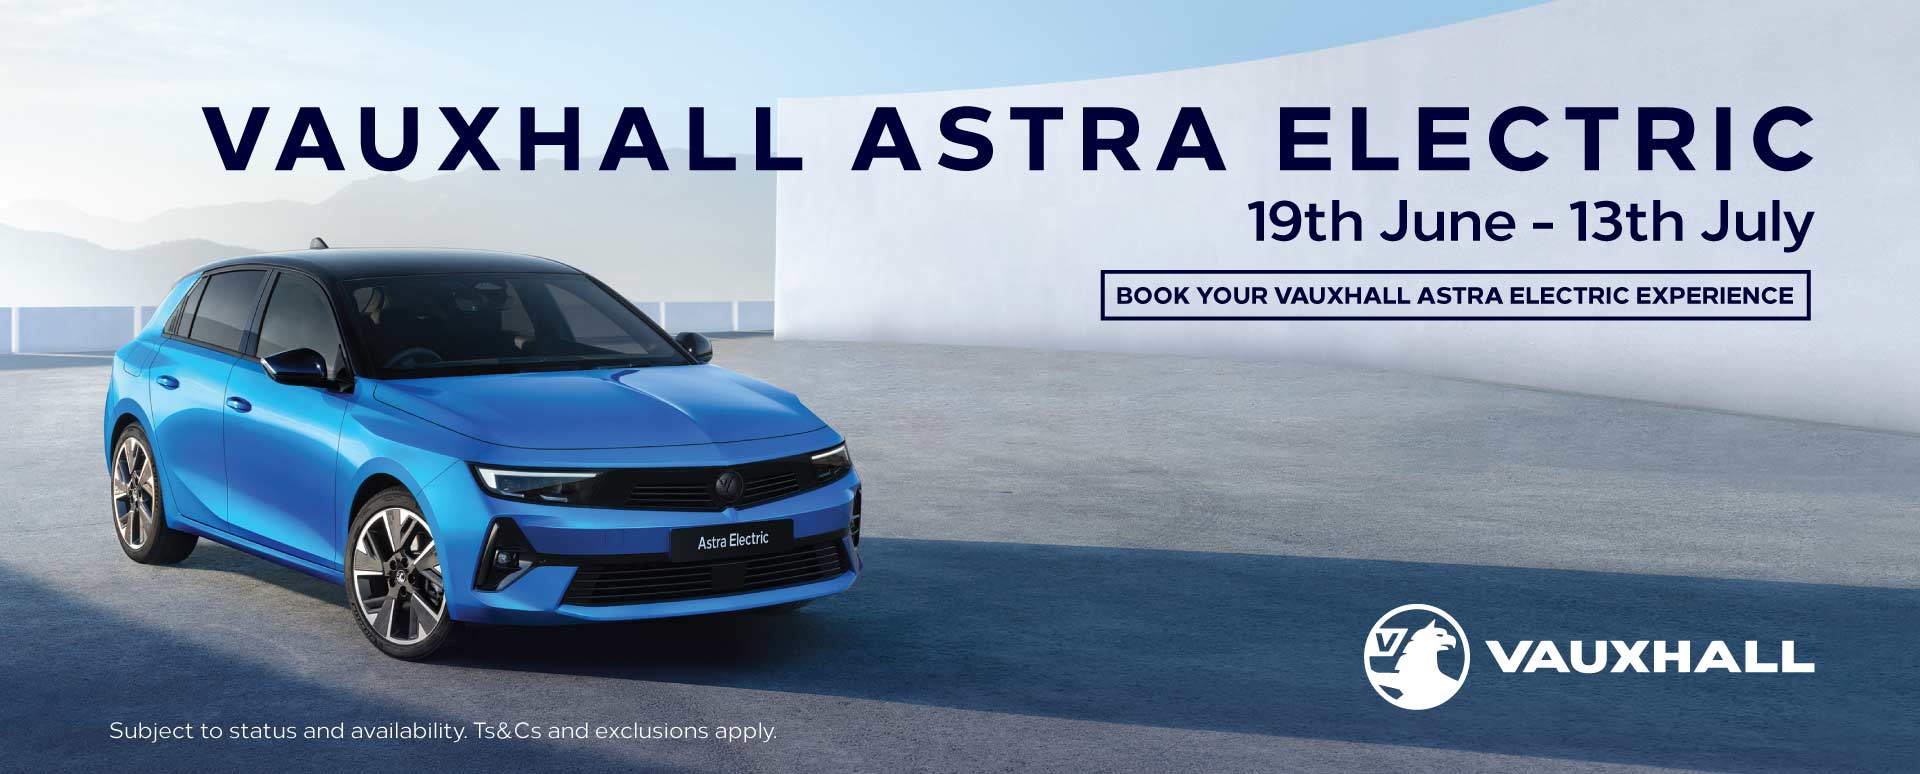 Vauxhall Astra Electric Experience